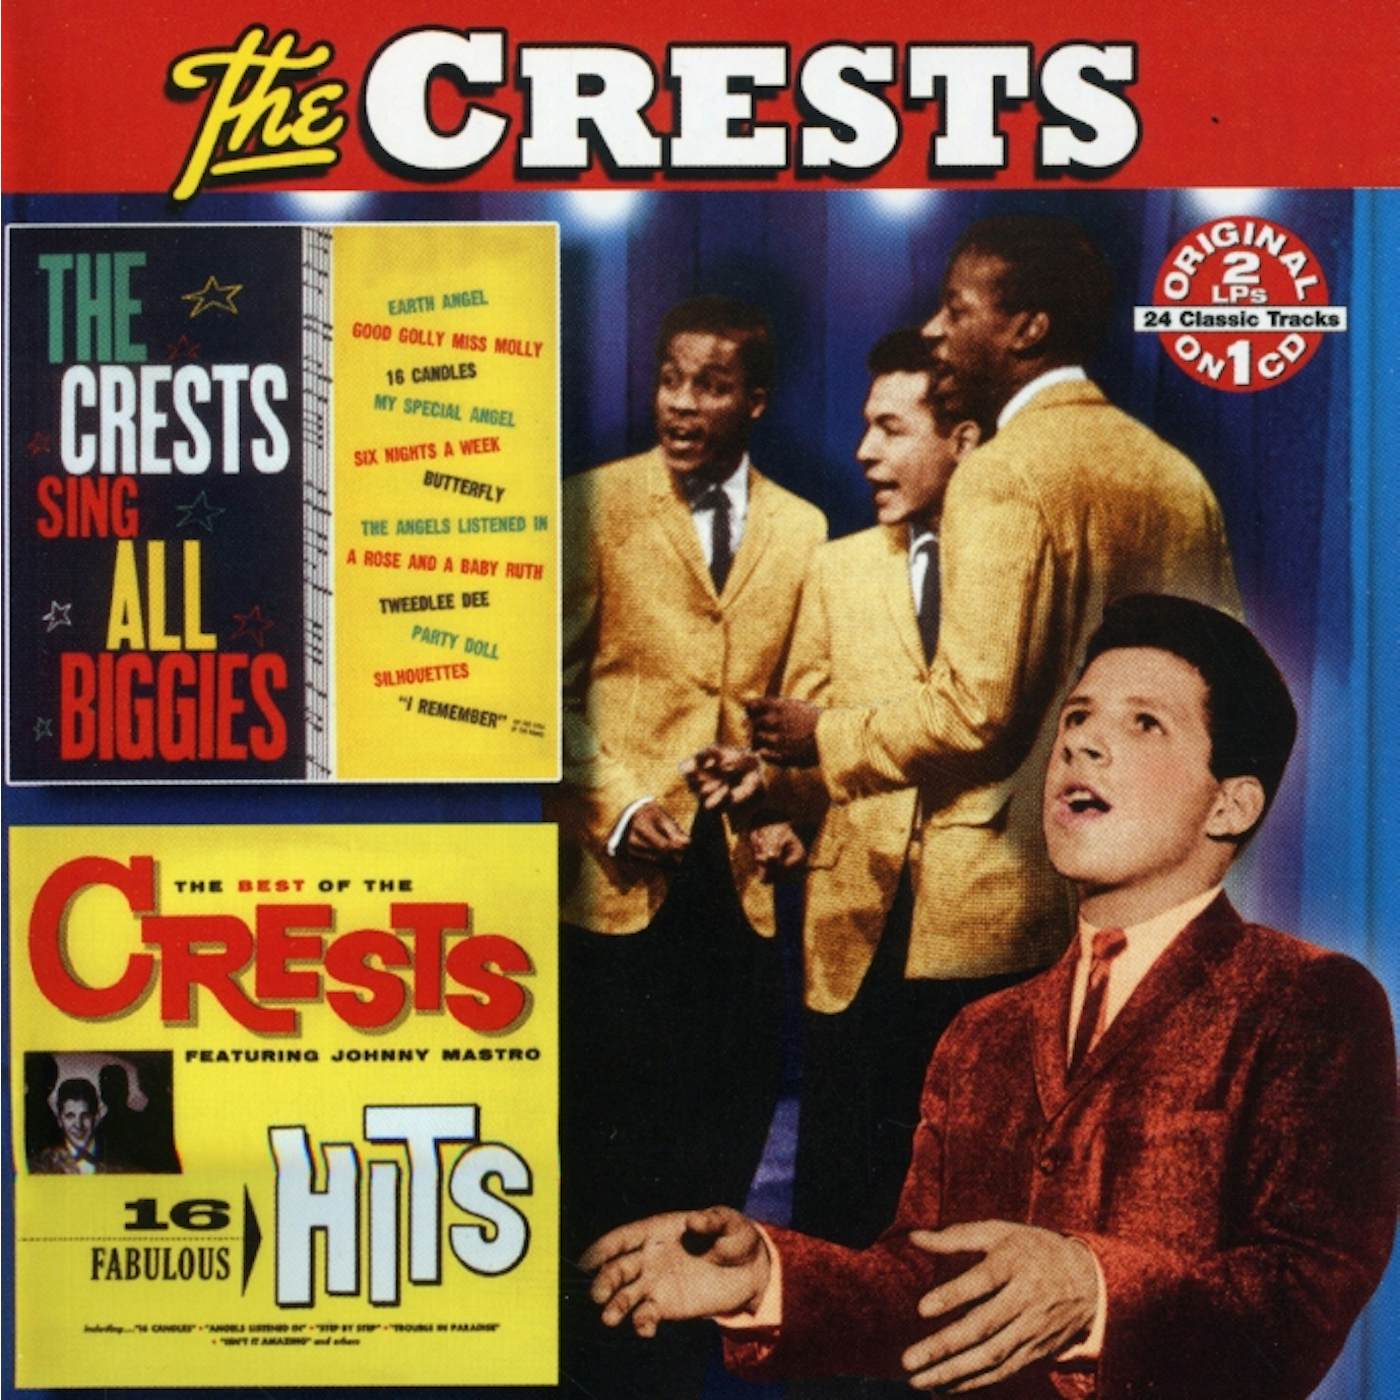 SING ALL BIGGIES / THE BEST OF THE CRESTS CD